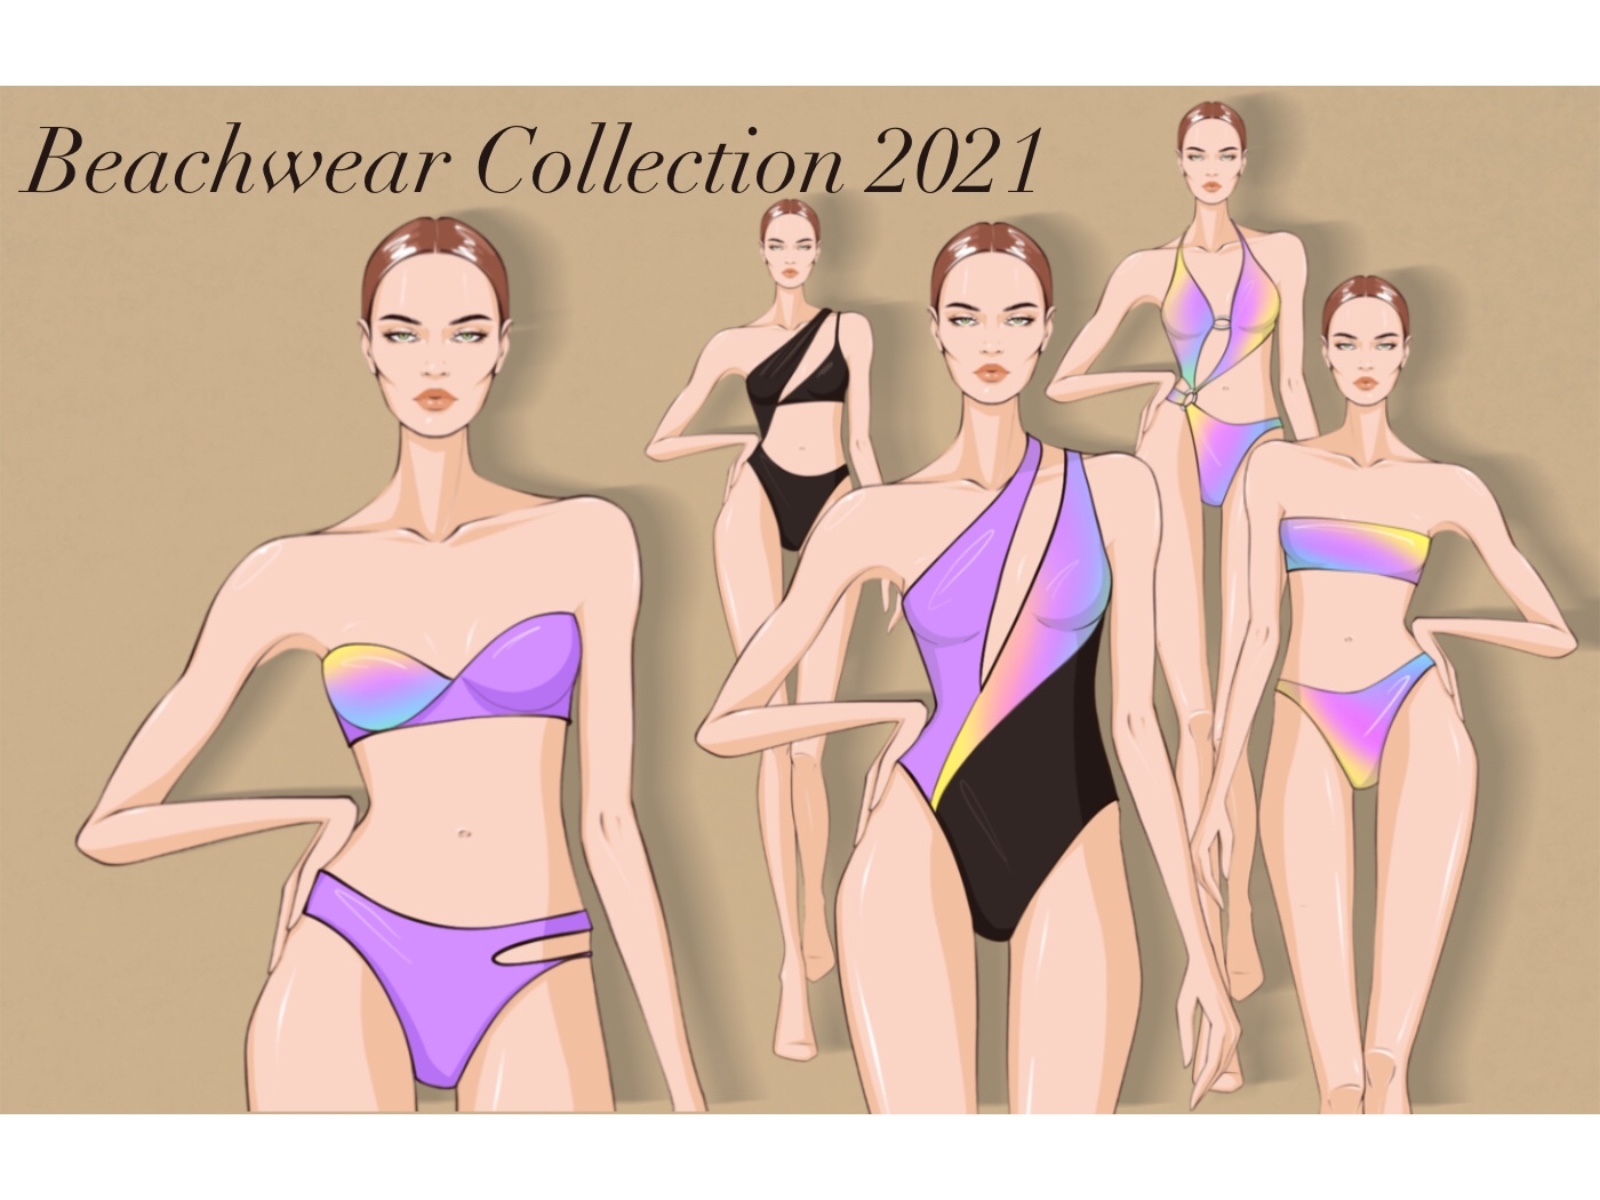 Sketches Swimwear Vector Images (over 2,300)